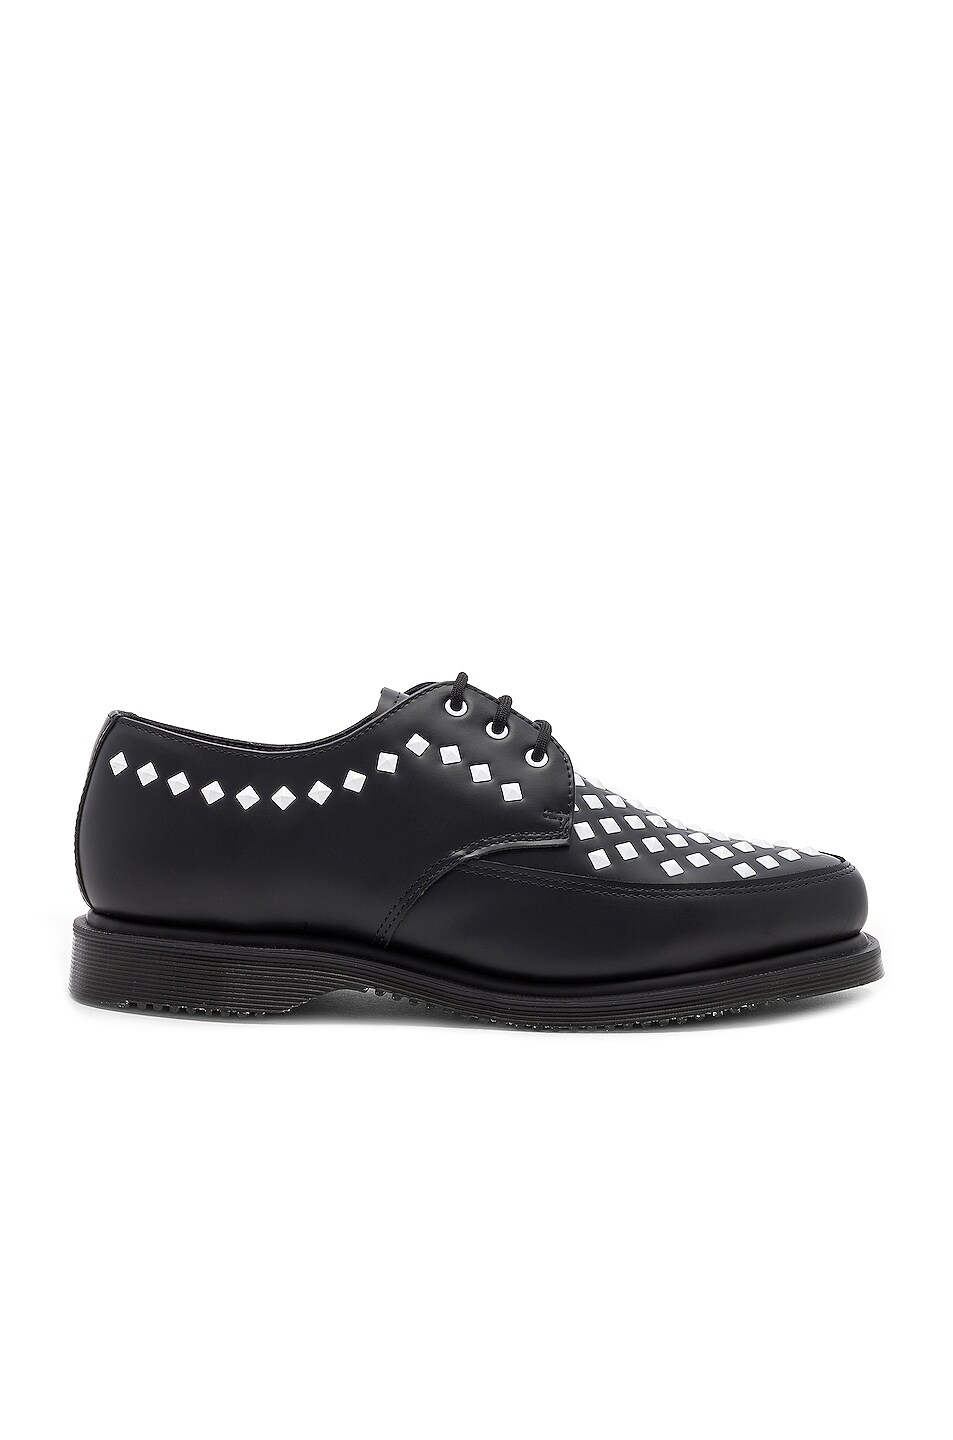 Image 1 of Dr. Martens Smooth Leather Rousden Stud Creepers in Black